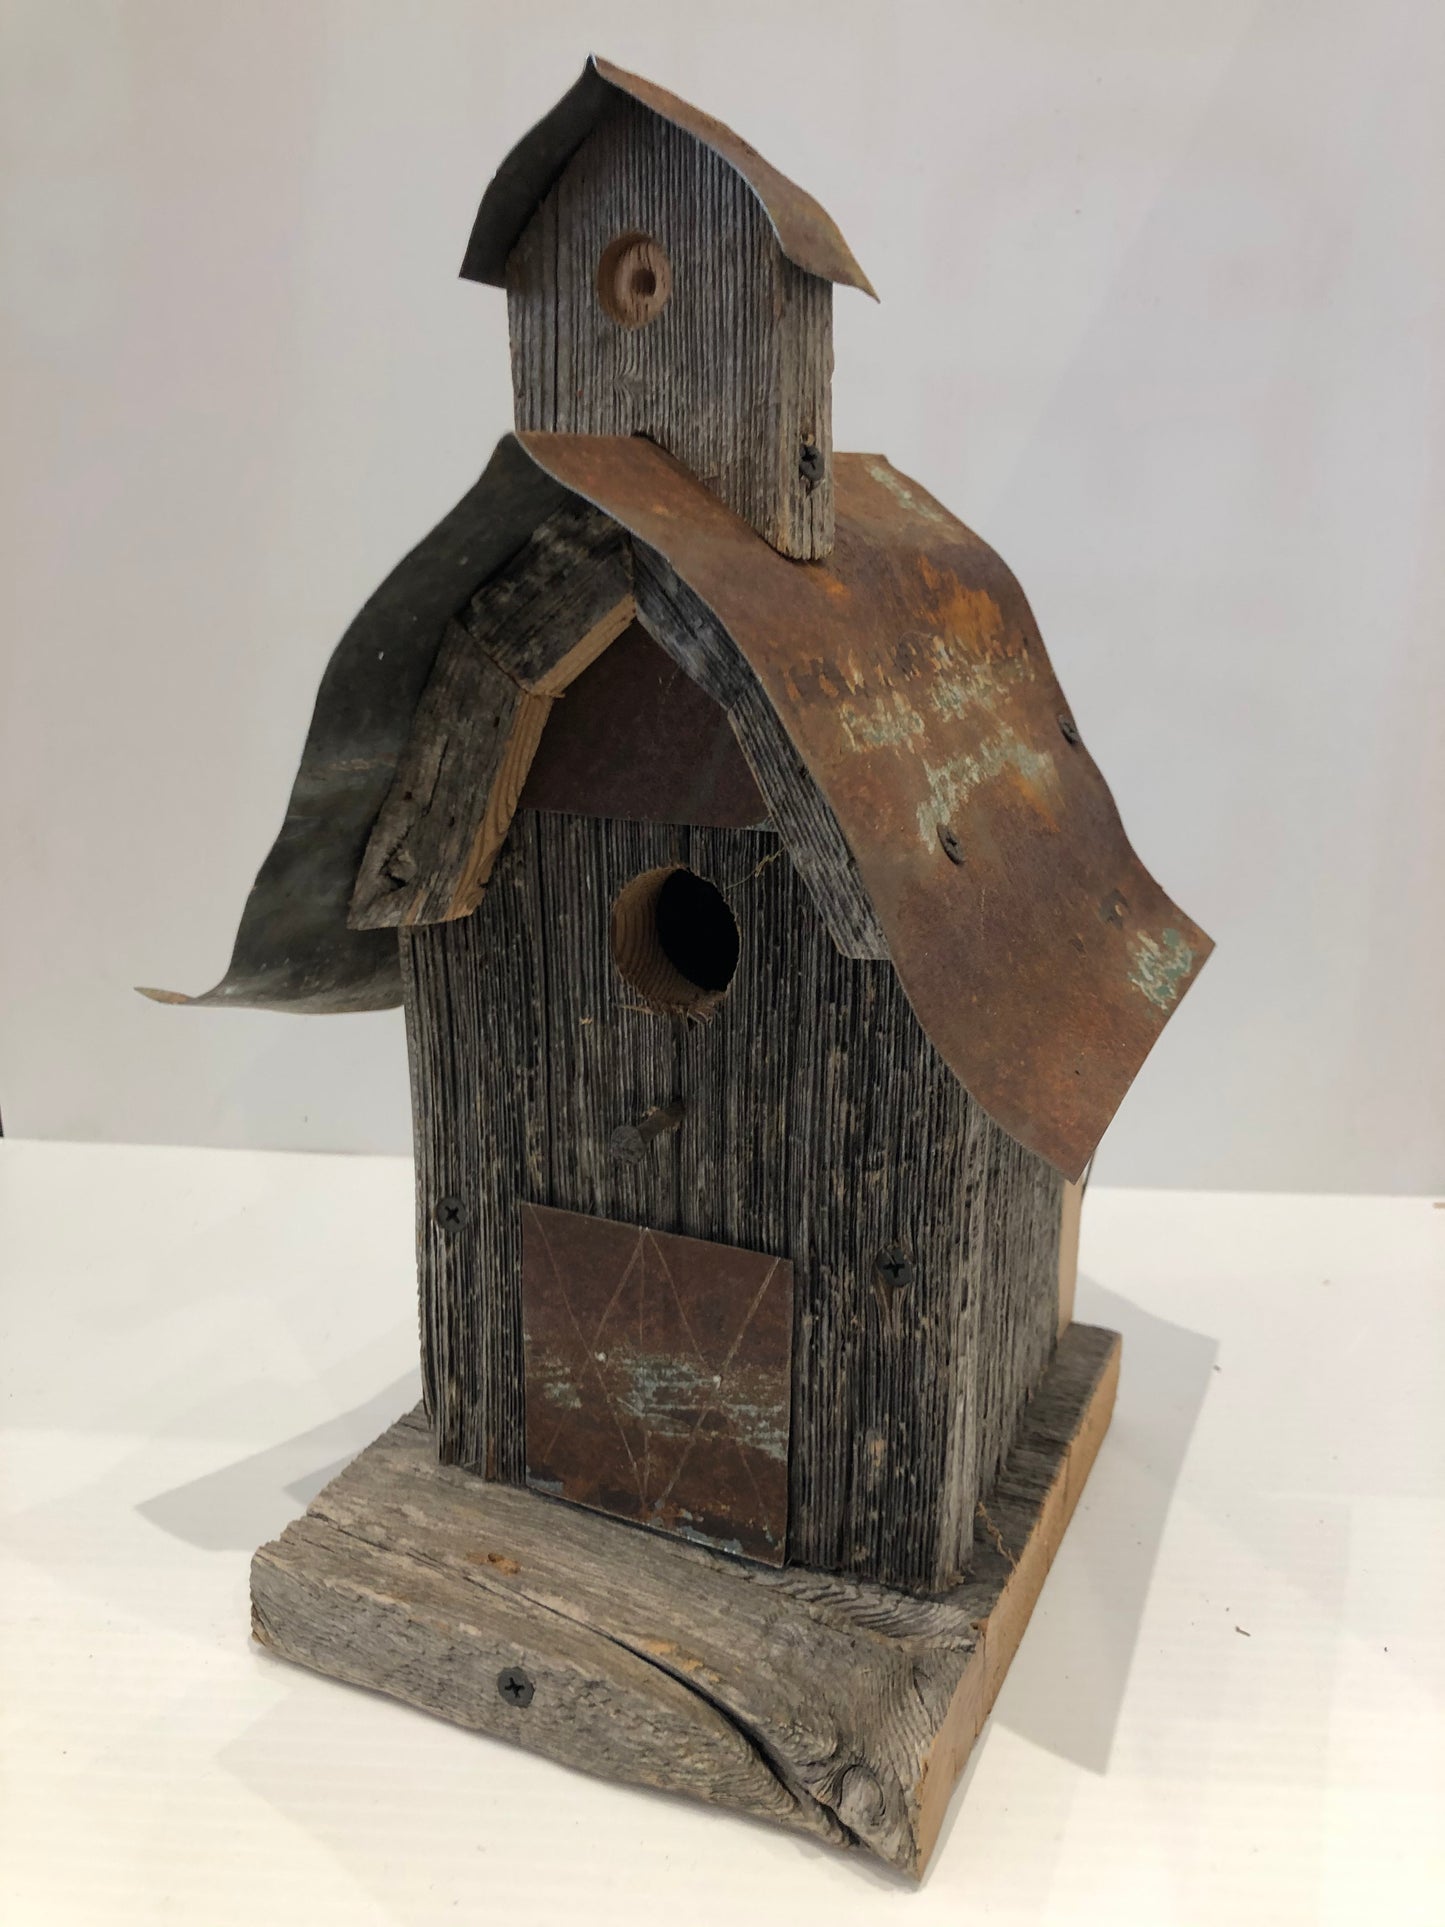 Reclaimed Wood Bird Houses and Bat Boxes